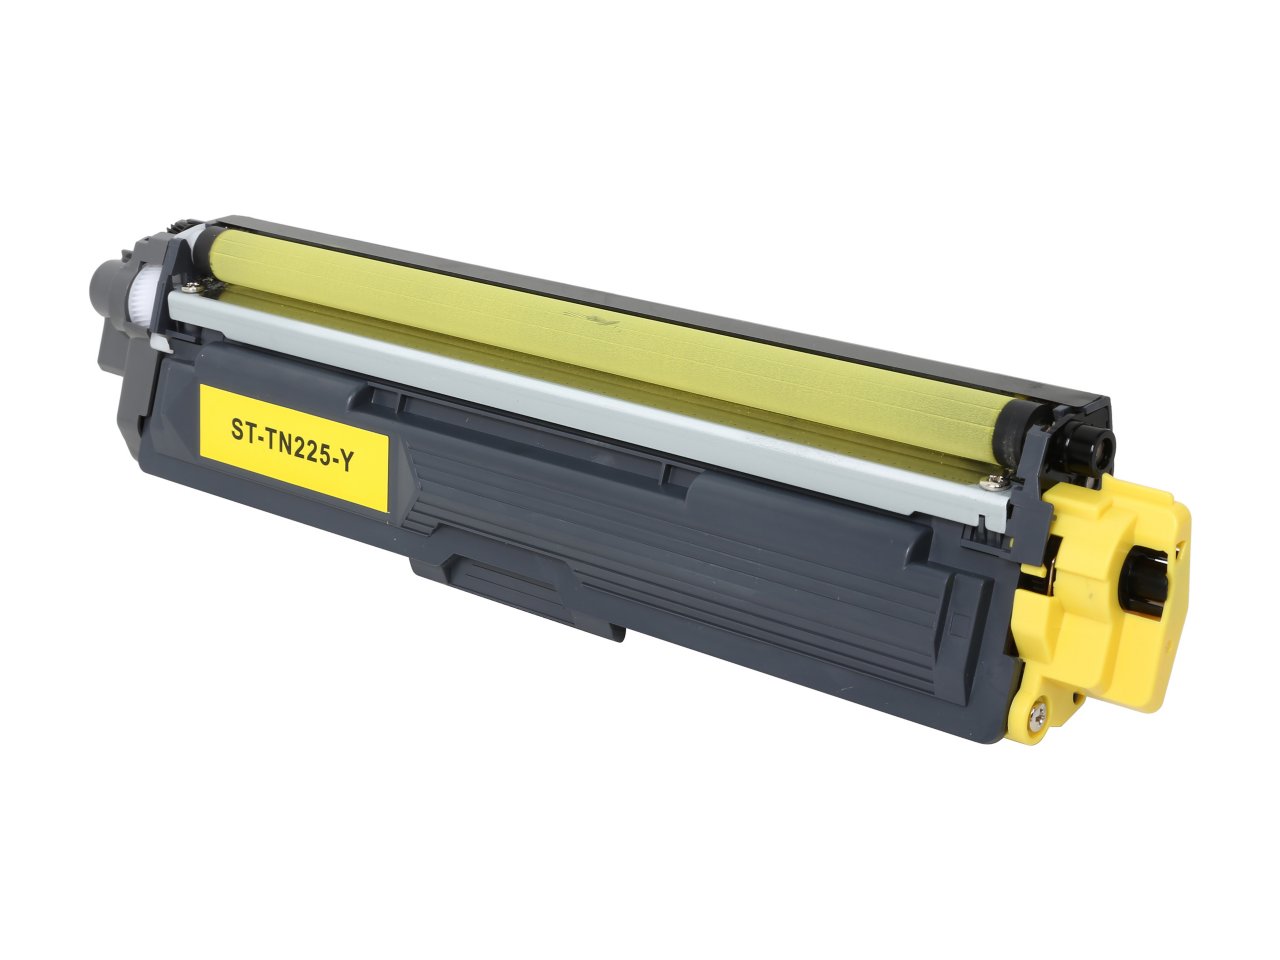 Brother TN221 BK / TN225 C/M/Y Toner Cartridge Remanufactured or compatible